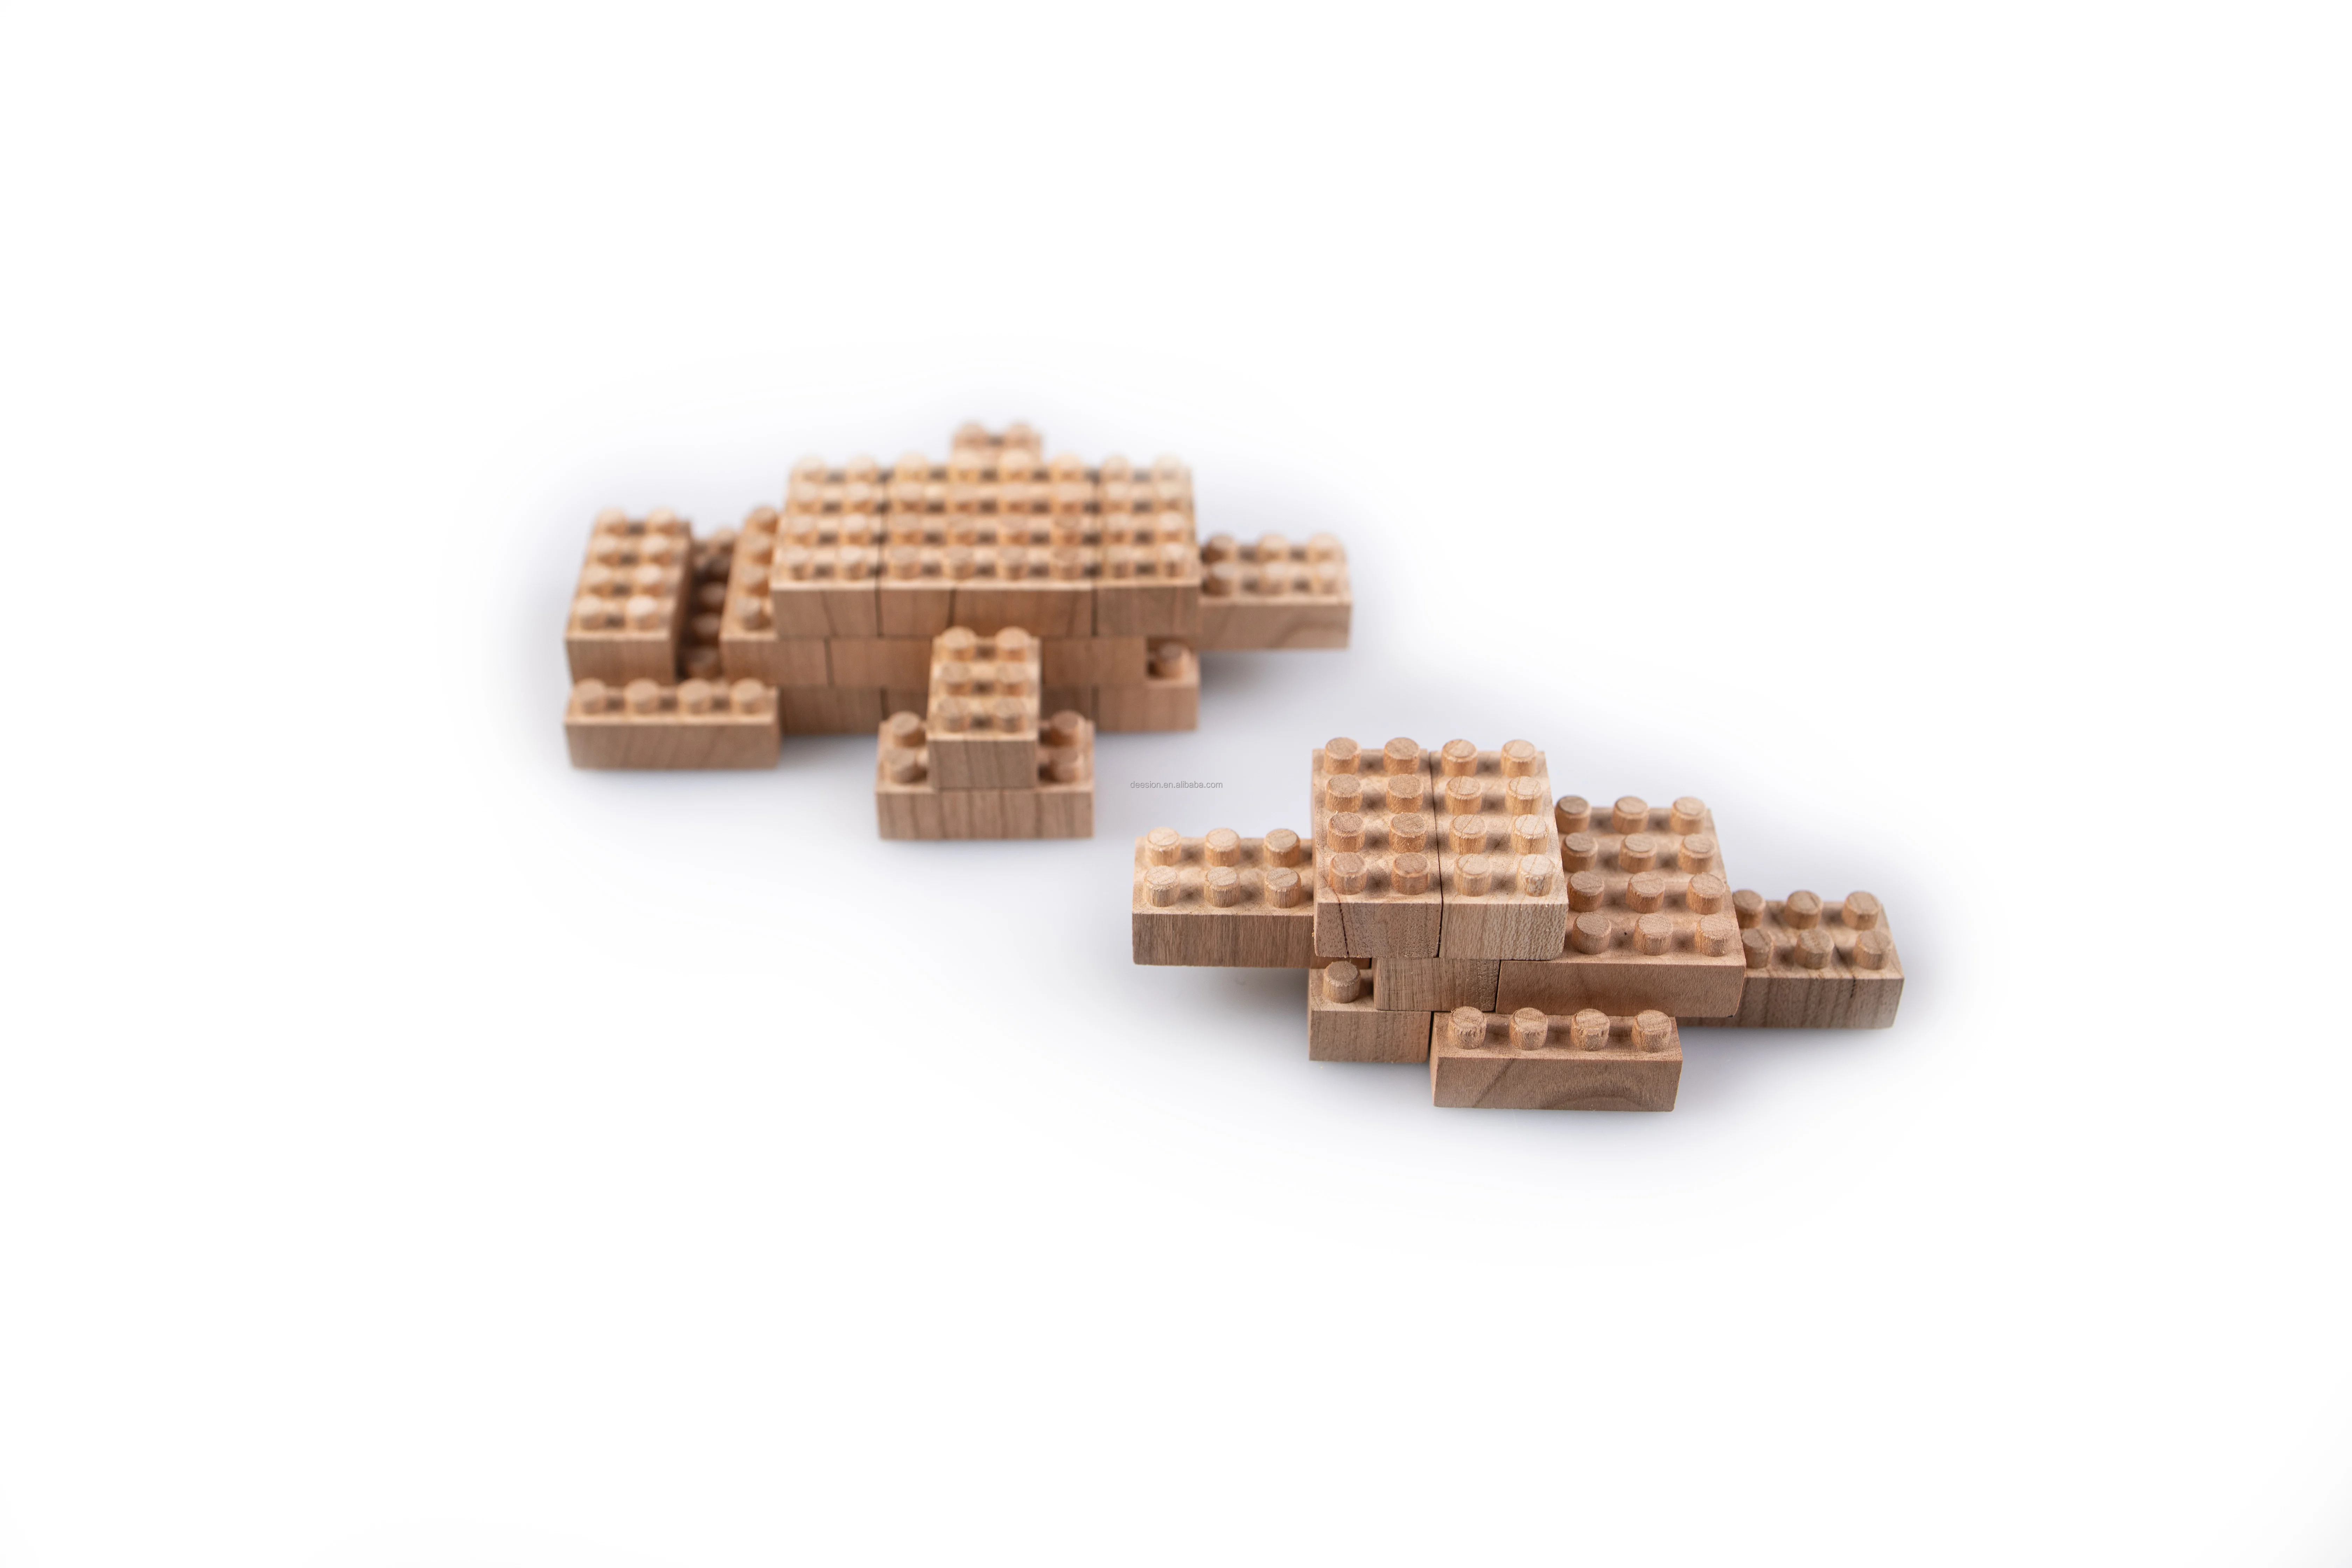 SOLID WOOD BRICK SET OF 48 ECO FRIENDLY NON-TOXIC SUIT FOR KIDS